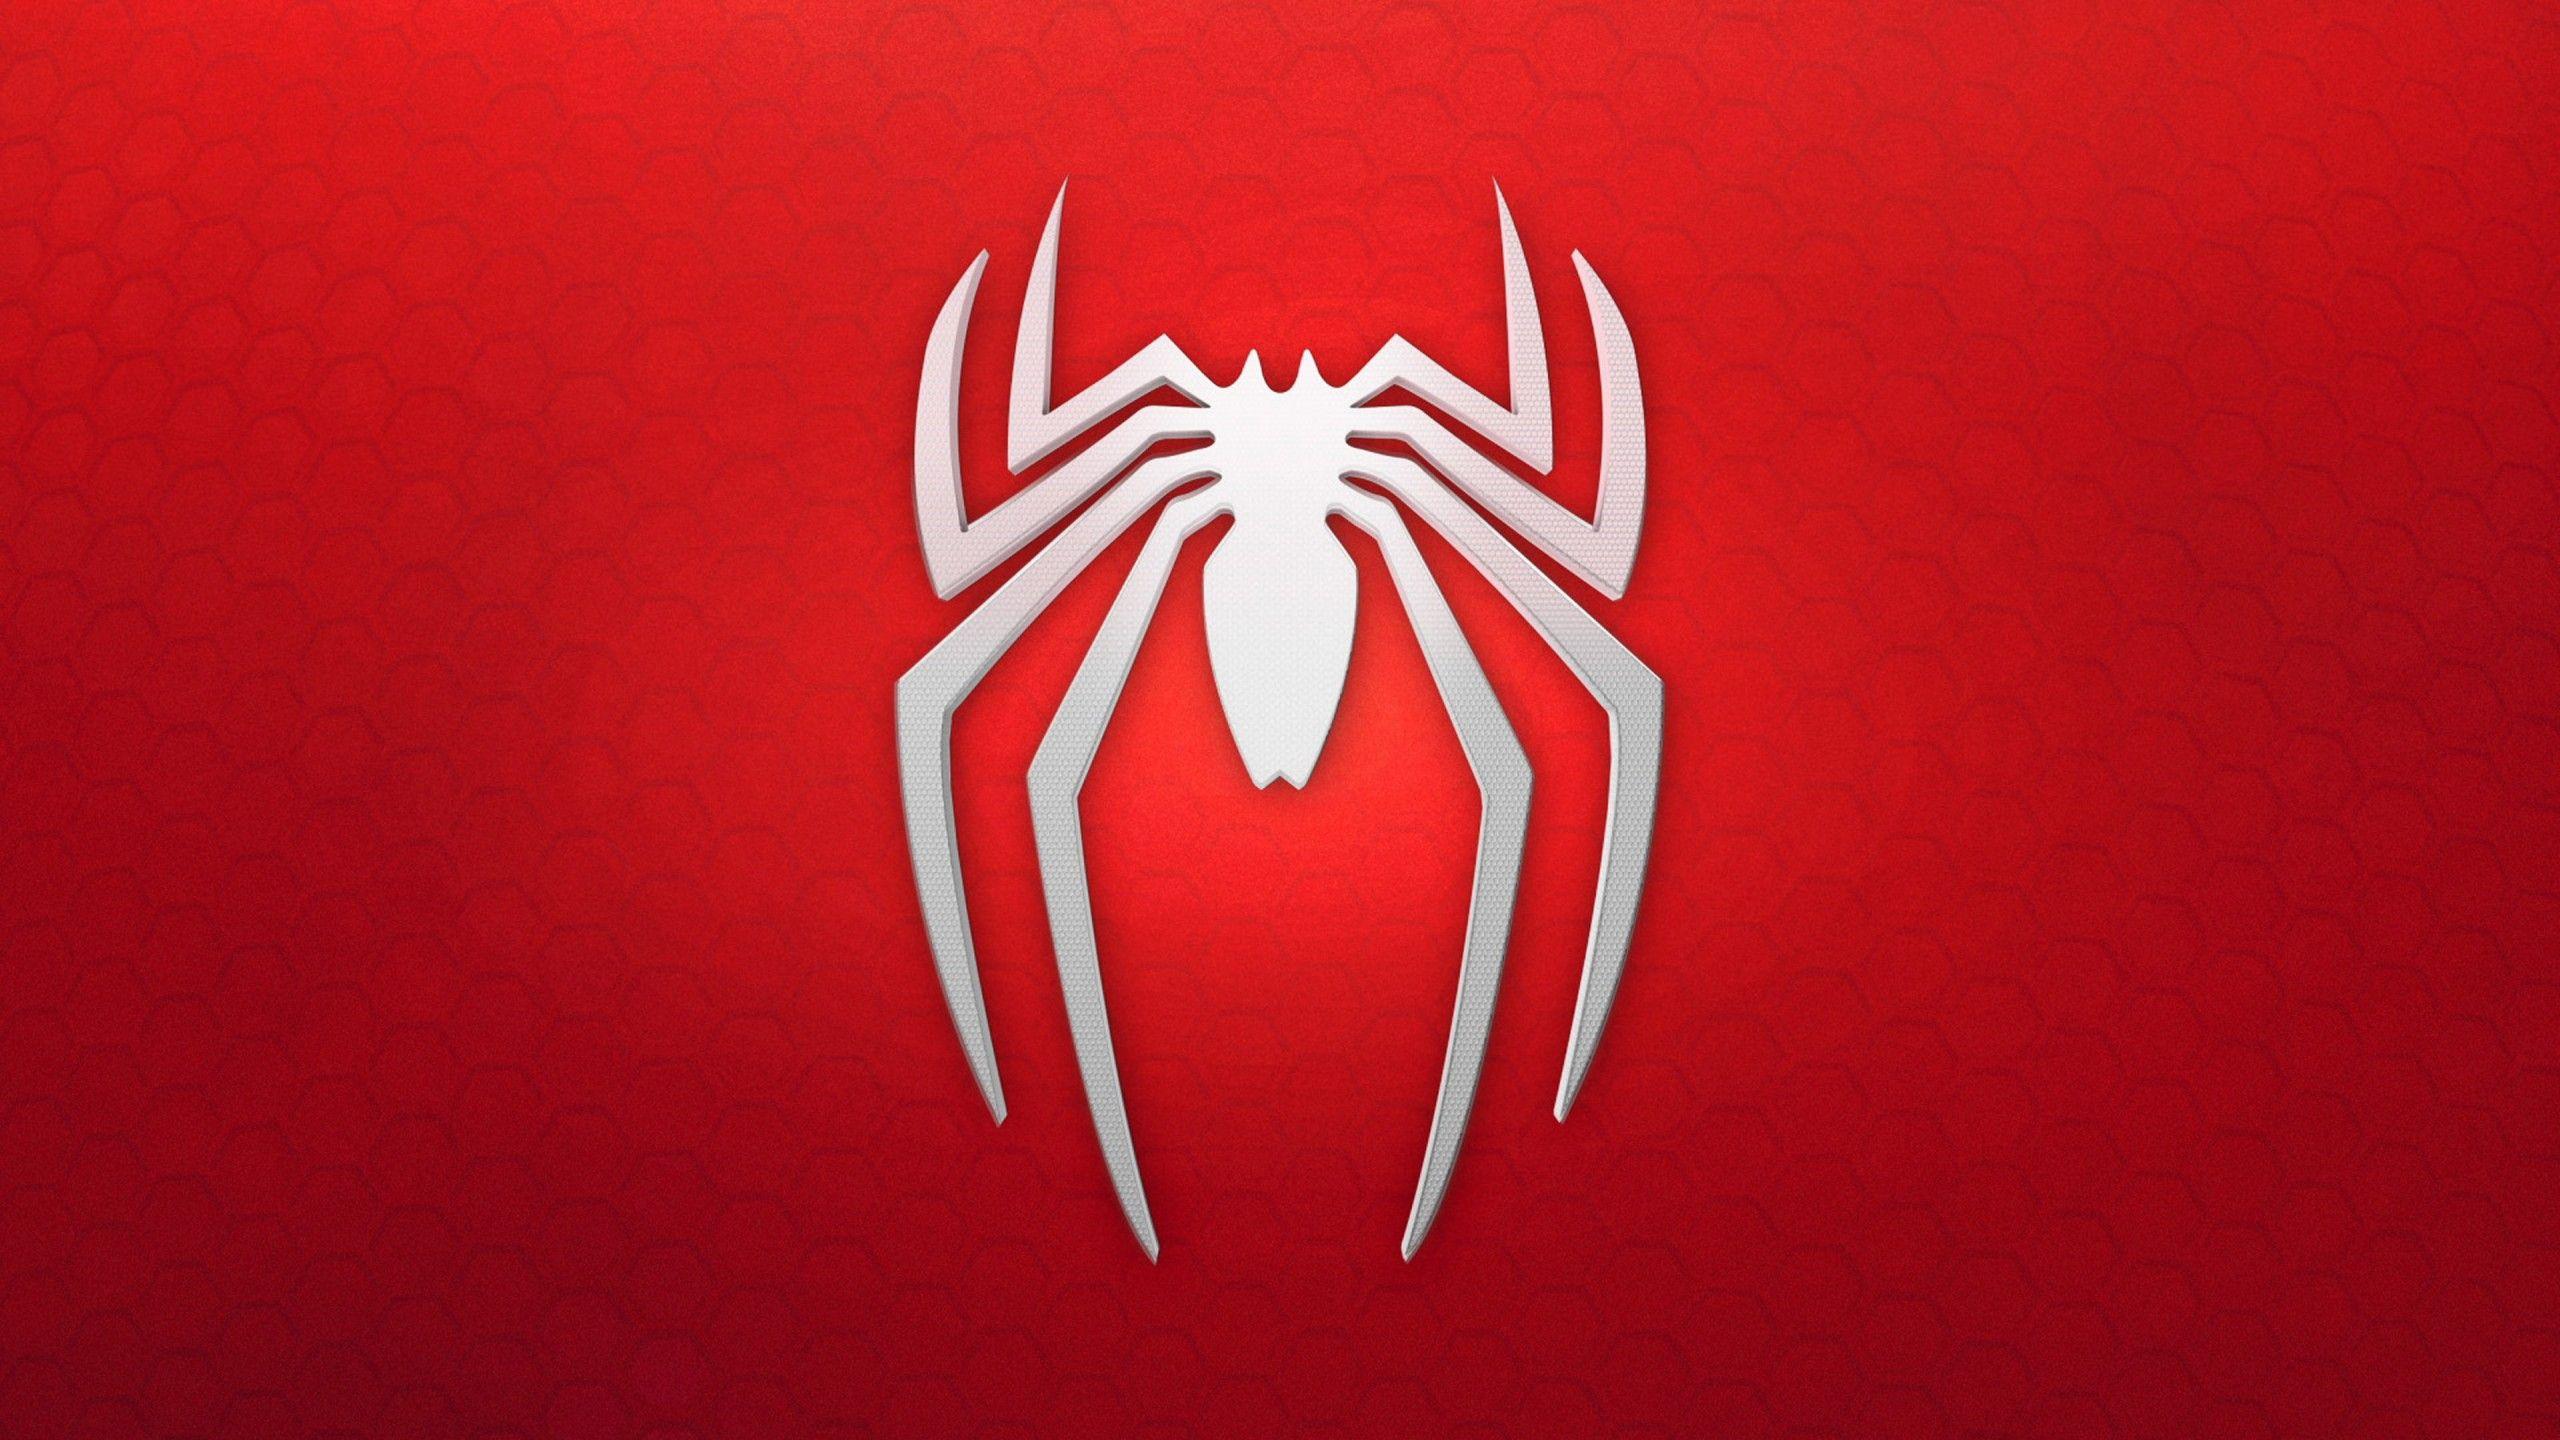 Red White and Animal Logo - Wallpaper spiderman, logo, background, red, white, Games #11596 - Page 4